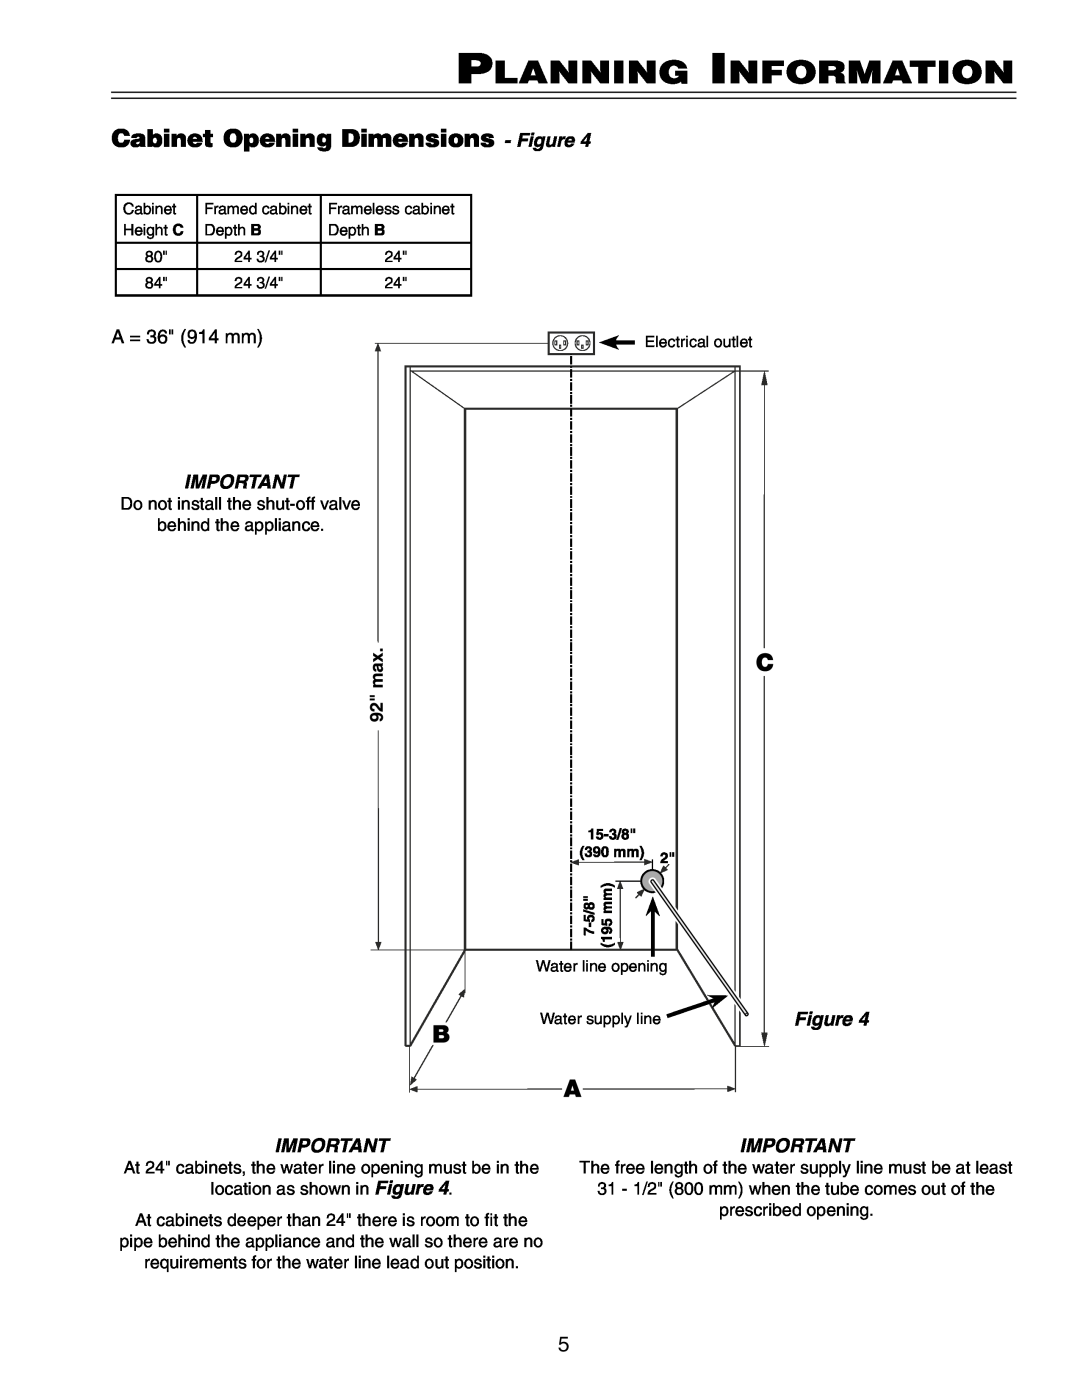 Liebherr HC 20 manual Cabinet Opening Dimensions - Figure, Planning Information, A = 36 914 mm 